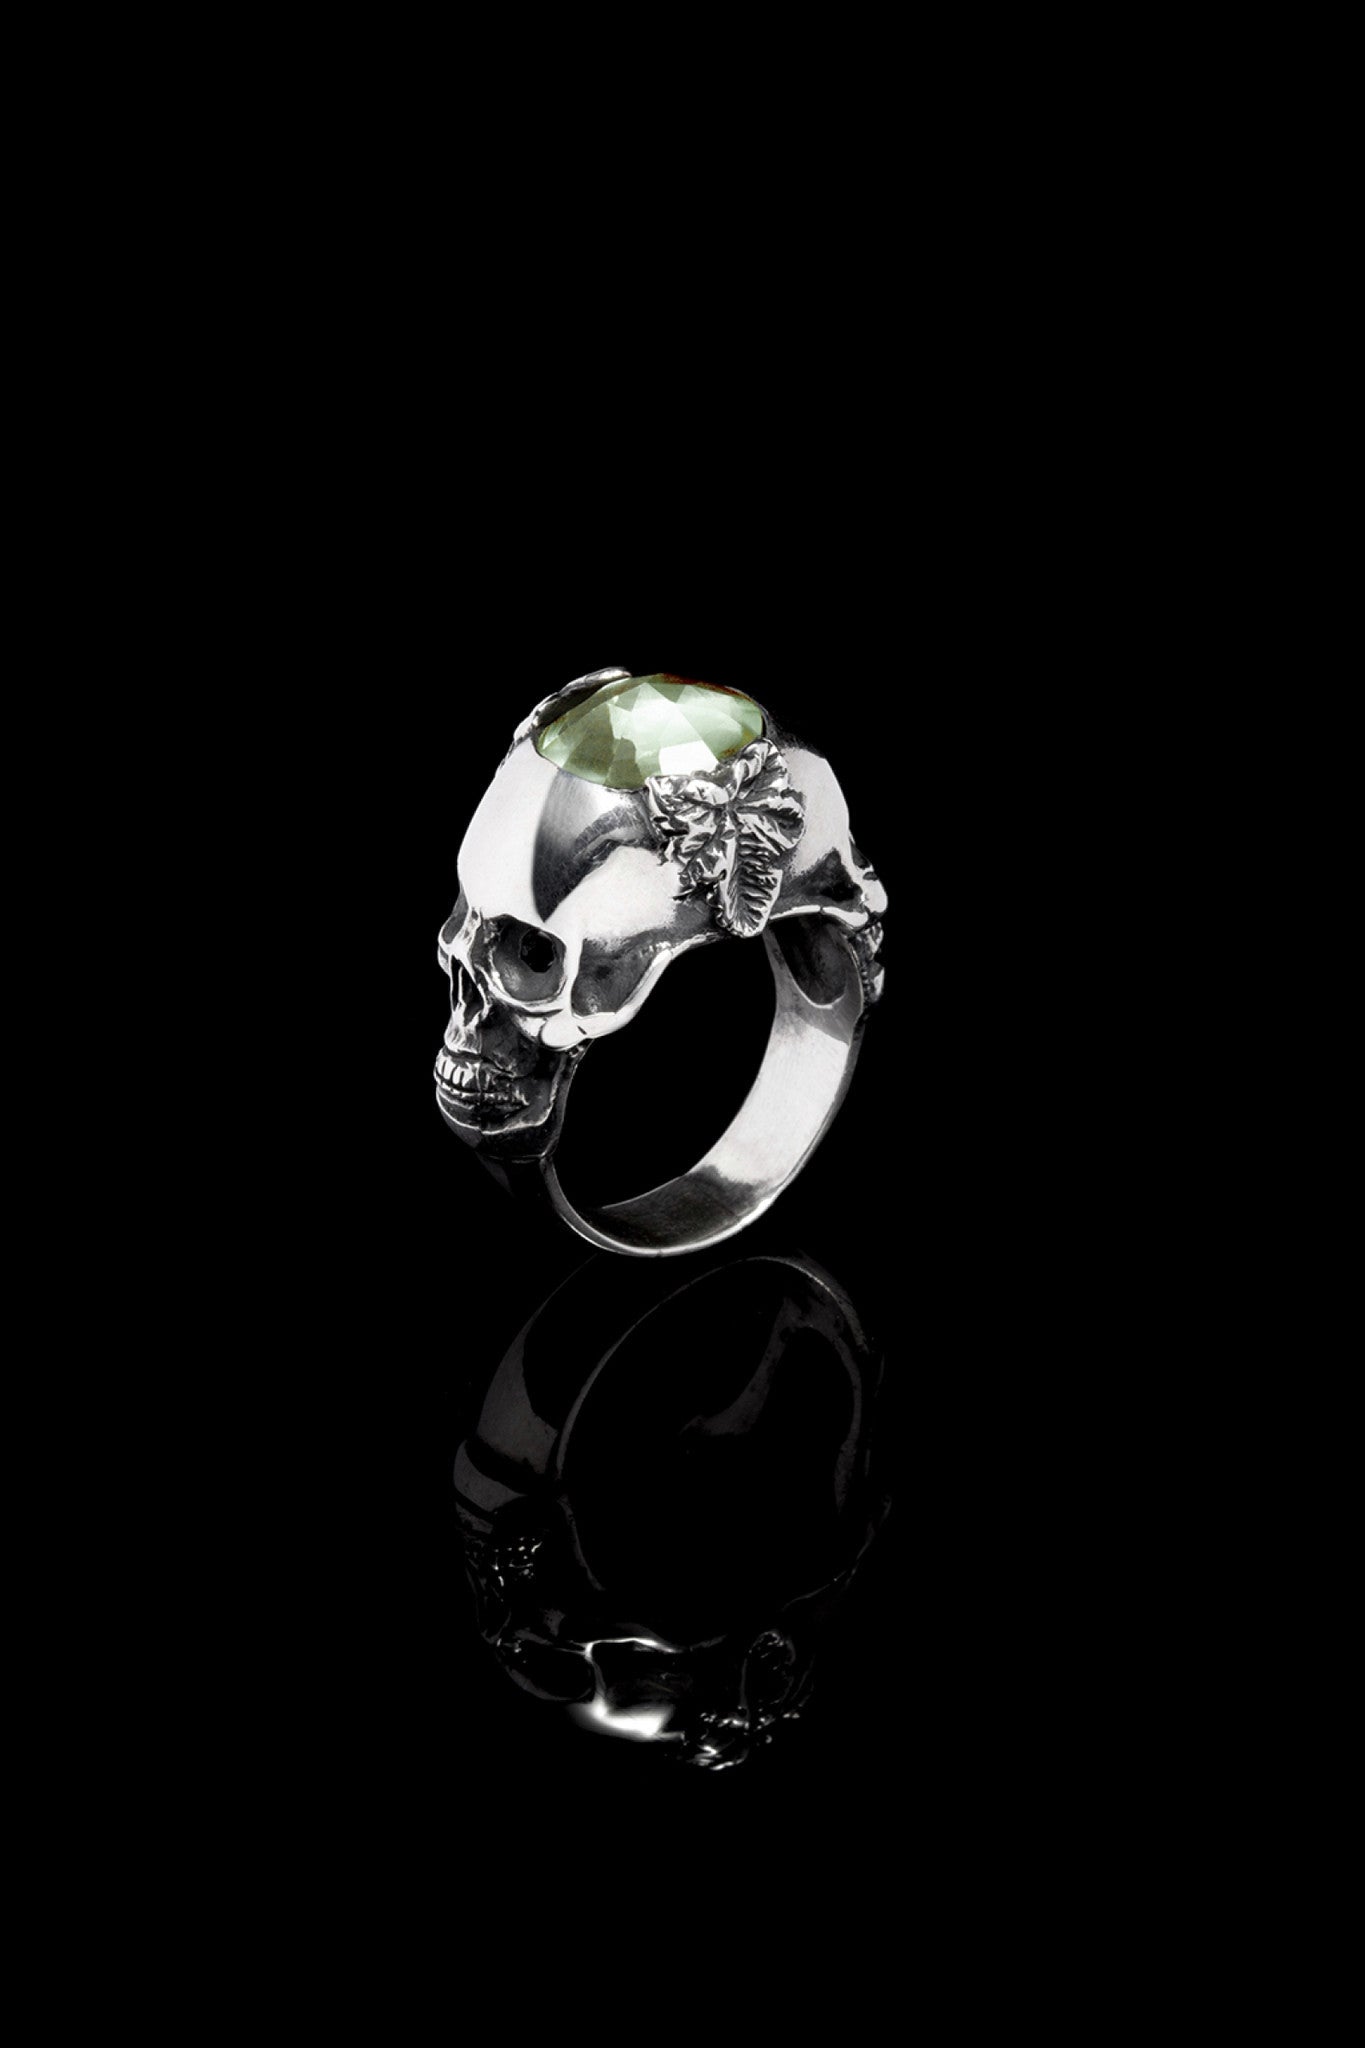 Ugo Cacciatori, Silver, Jewelry, Sterling Silver, Ring, Green Amethyst, Green Amethyst and Black Diamonds, Green Amethyst and Brown Diamonds, Green Amethyst and Emeralds, Green Amethyst and Rubies, Green Amethyst and Sapphires